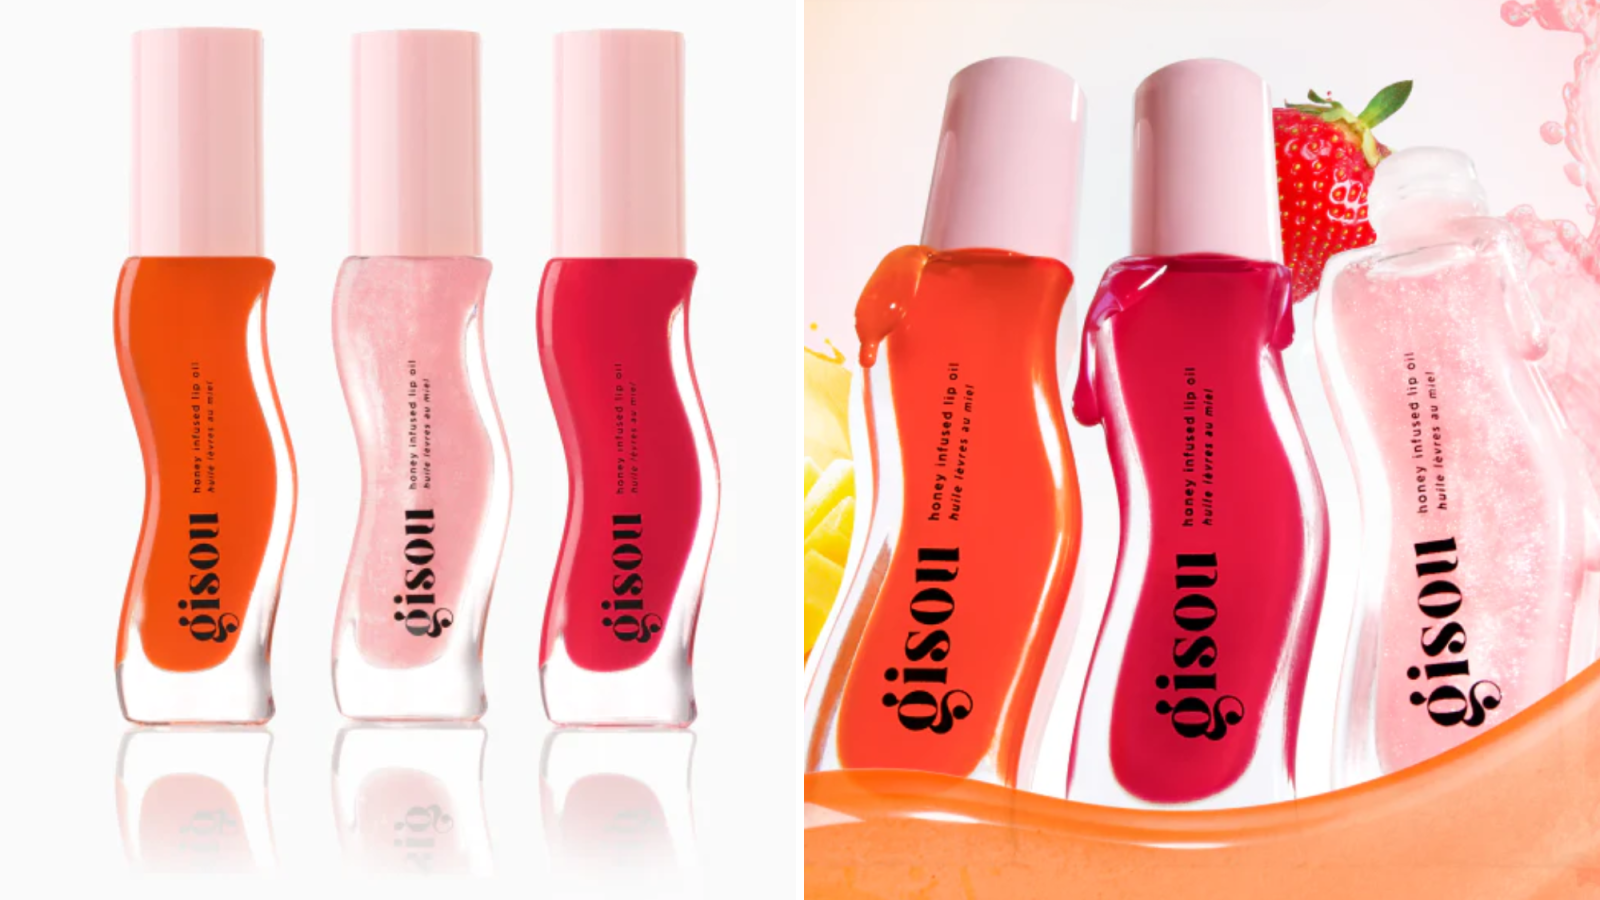 Drench Your Thirsty Lips in These Fruit Juicy Gisou Lip Oils